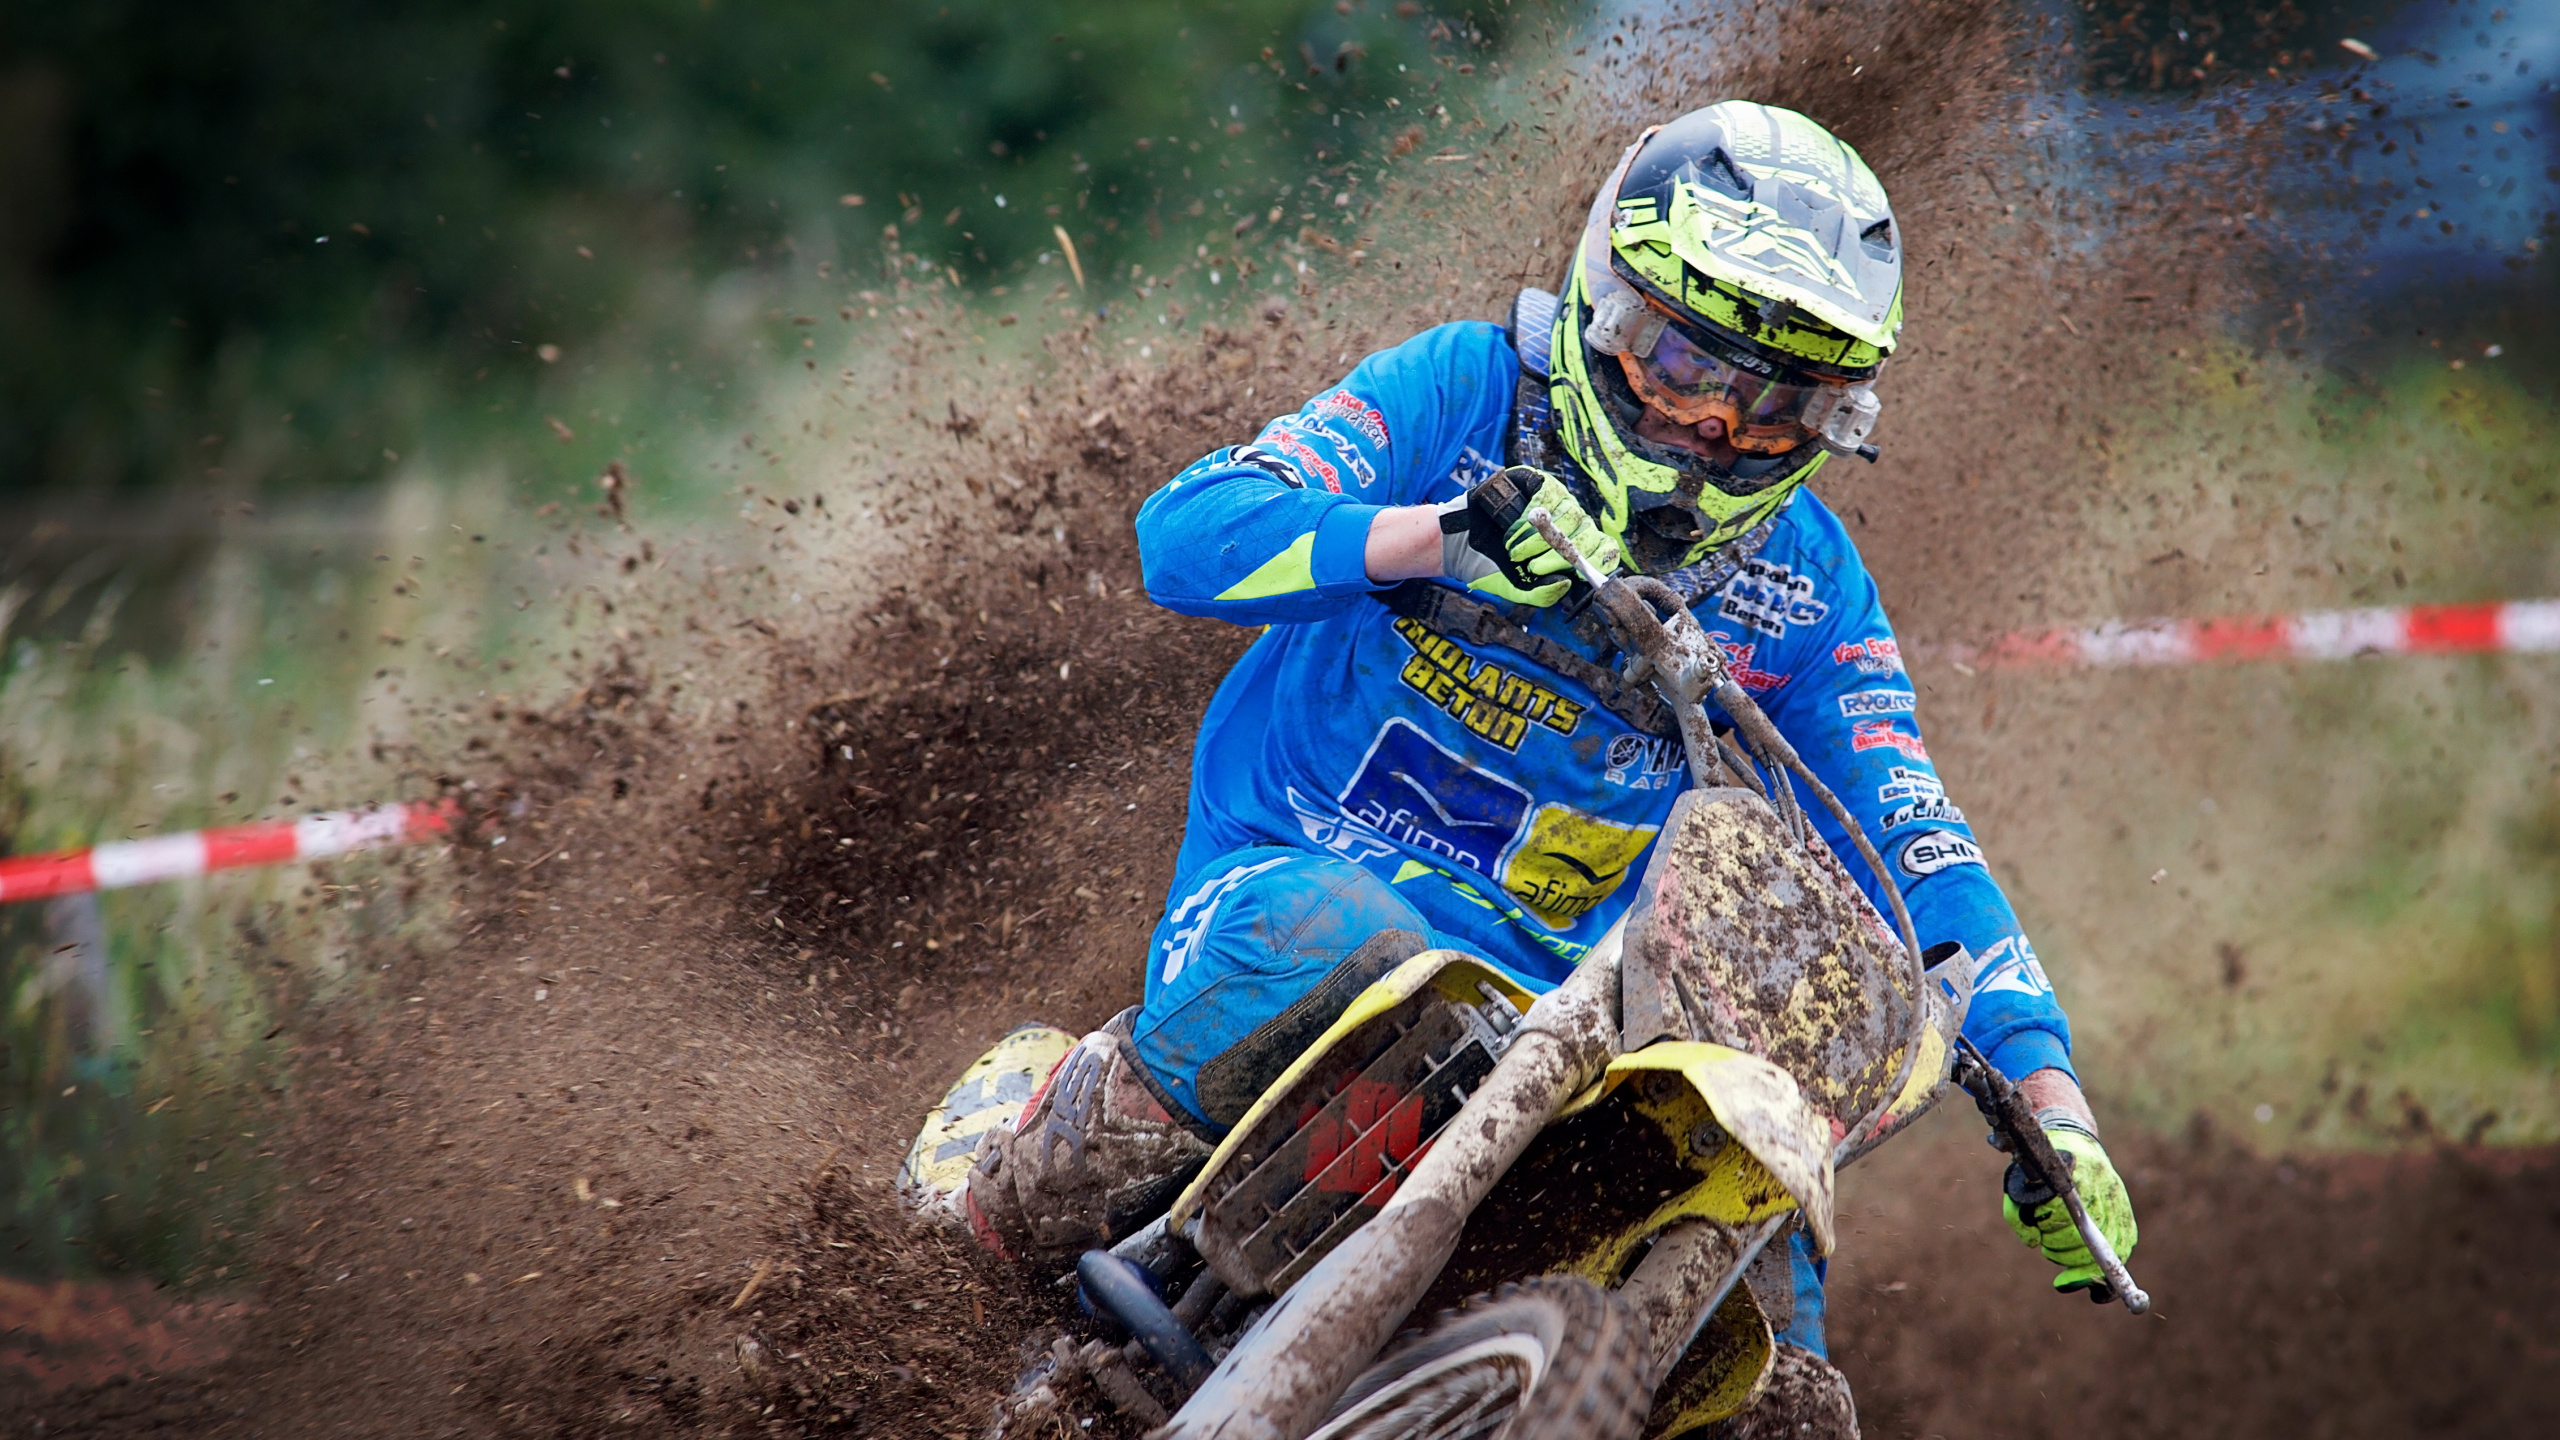 Man in Blue and Red Jacket Riding on Motocross Dirt Bike. Wallpaper in 2560x1440 Resolution